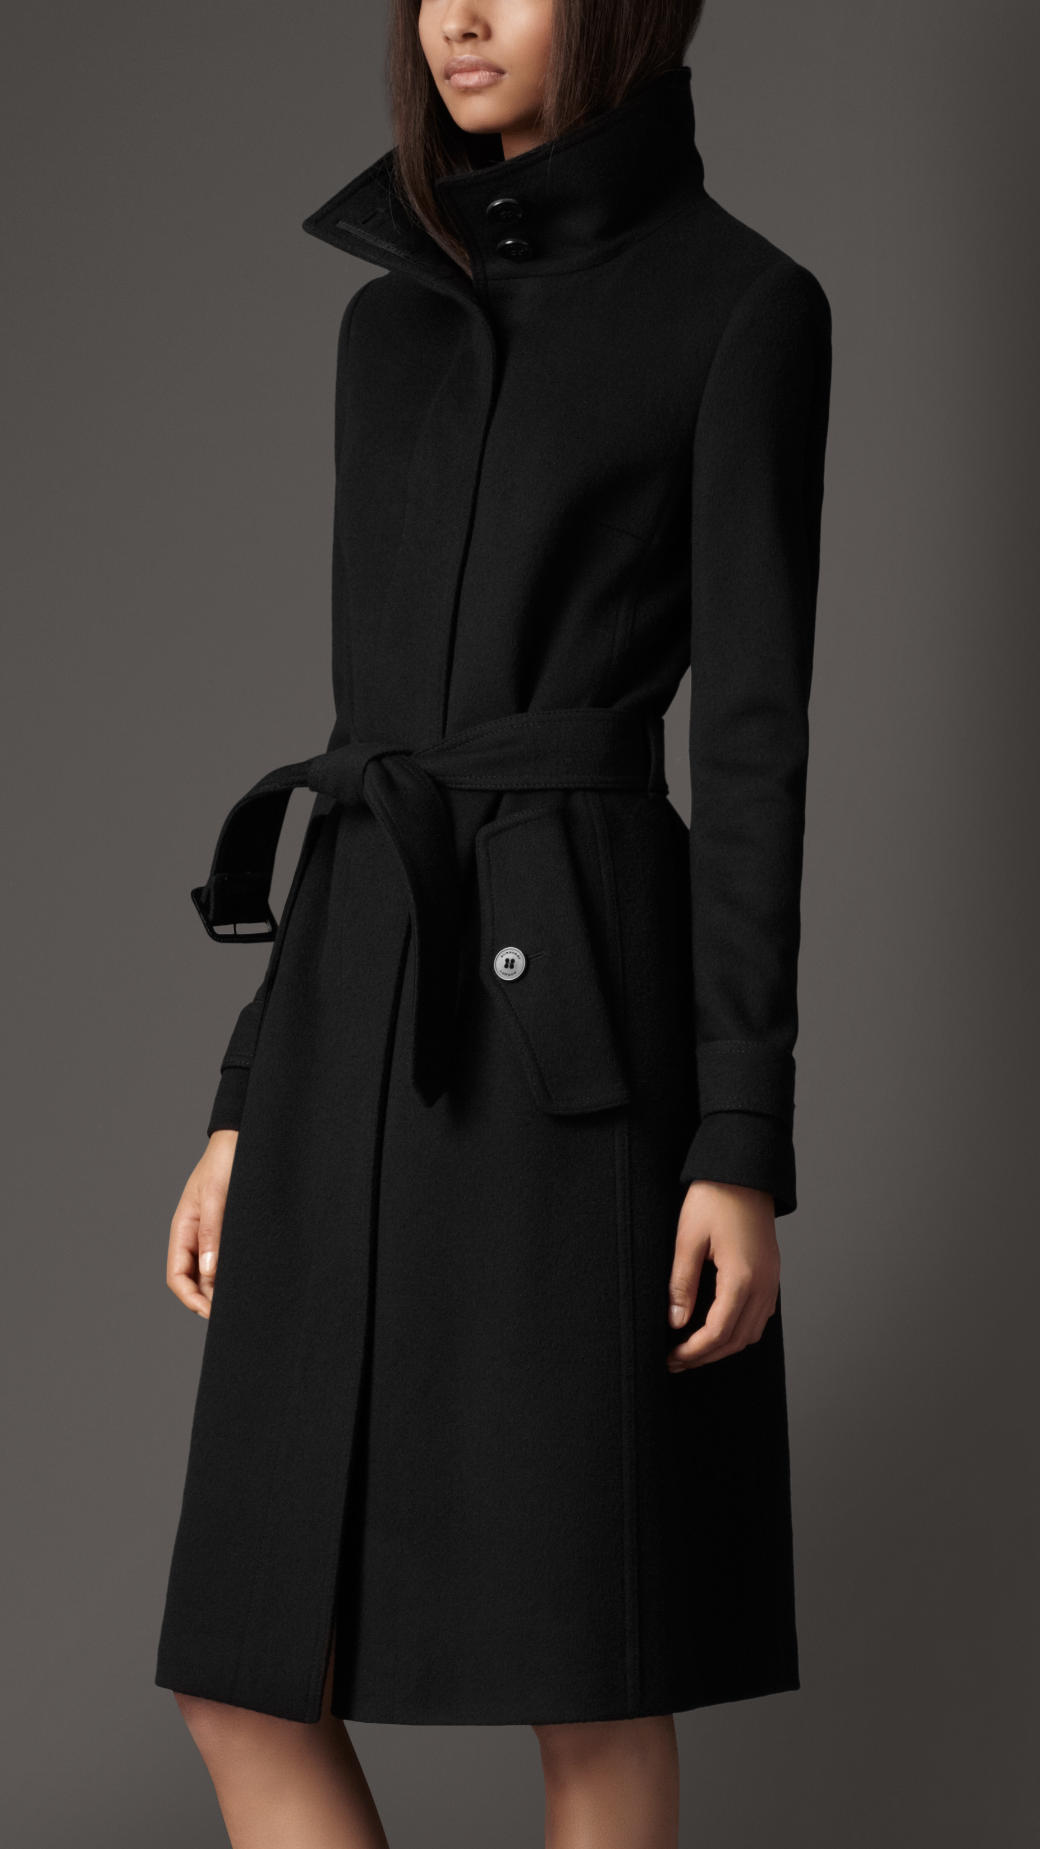 Burberry Wool Cashmere Coat in Black - Lyst